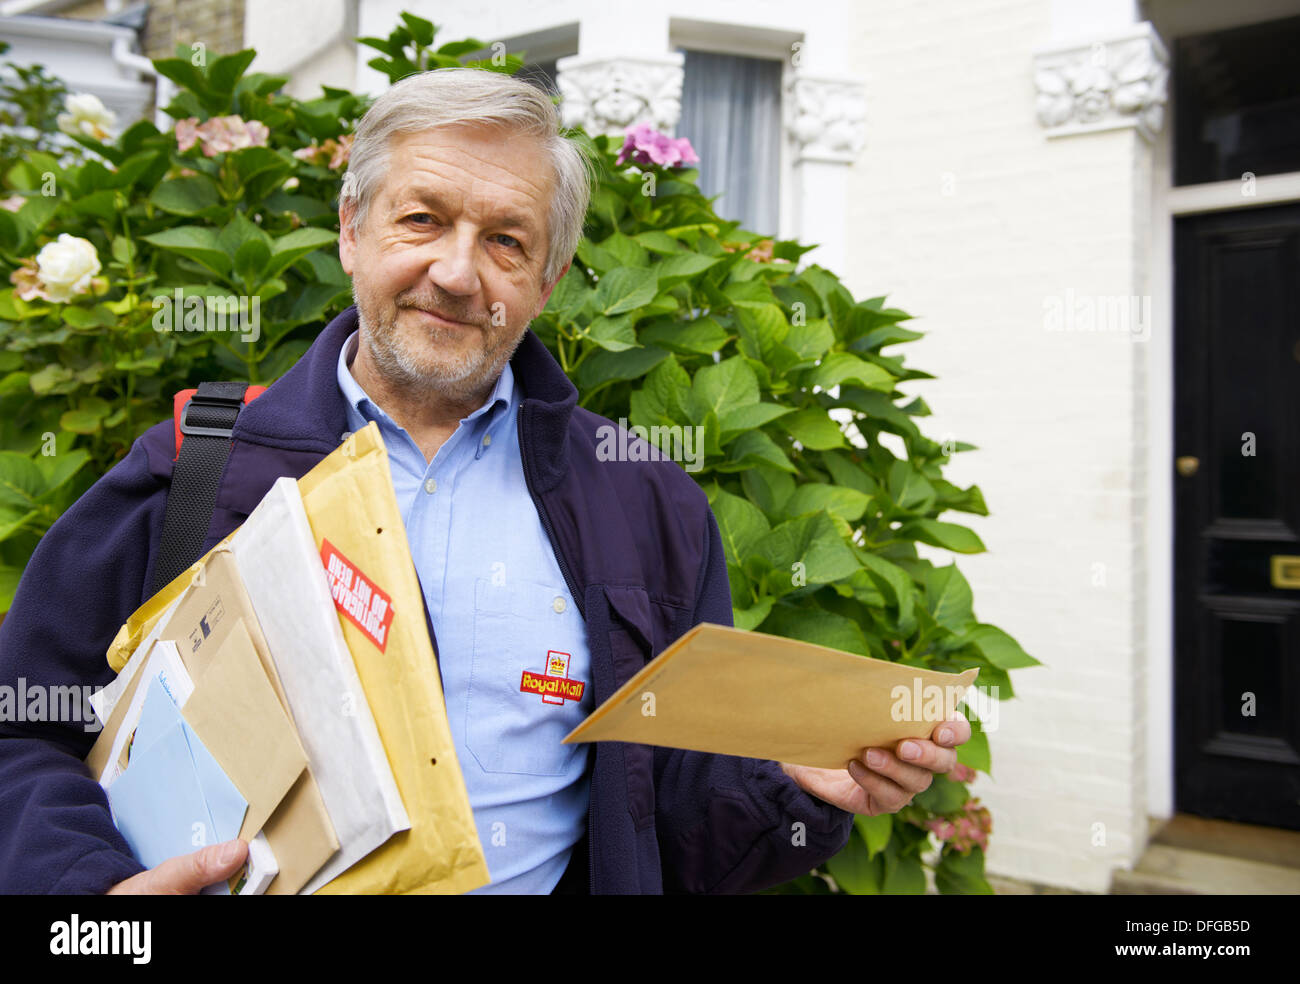 Royal Mail Postman routinely delivering letters, airmail, packages and parcels in residential area in the UK Stock Photo